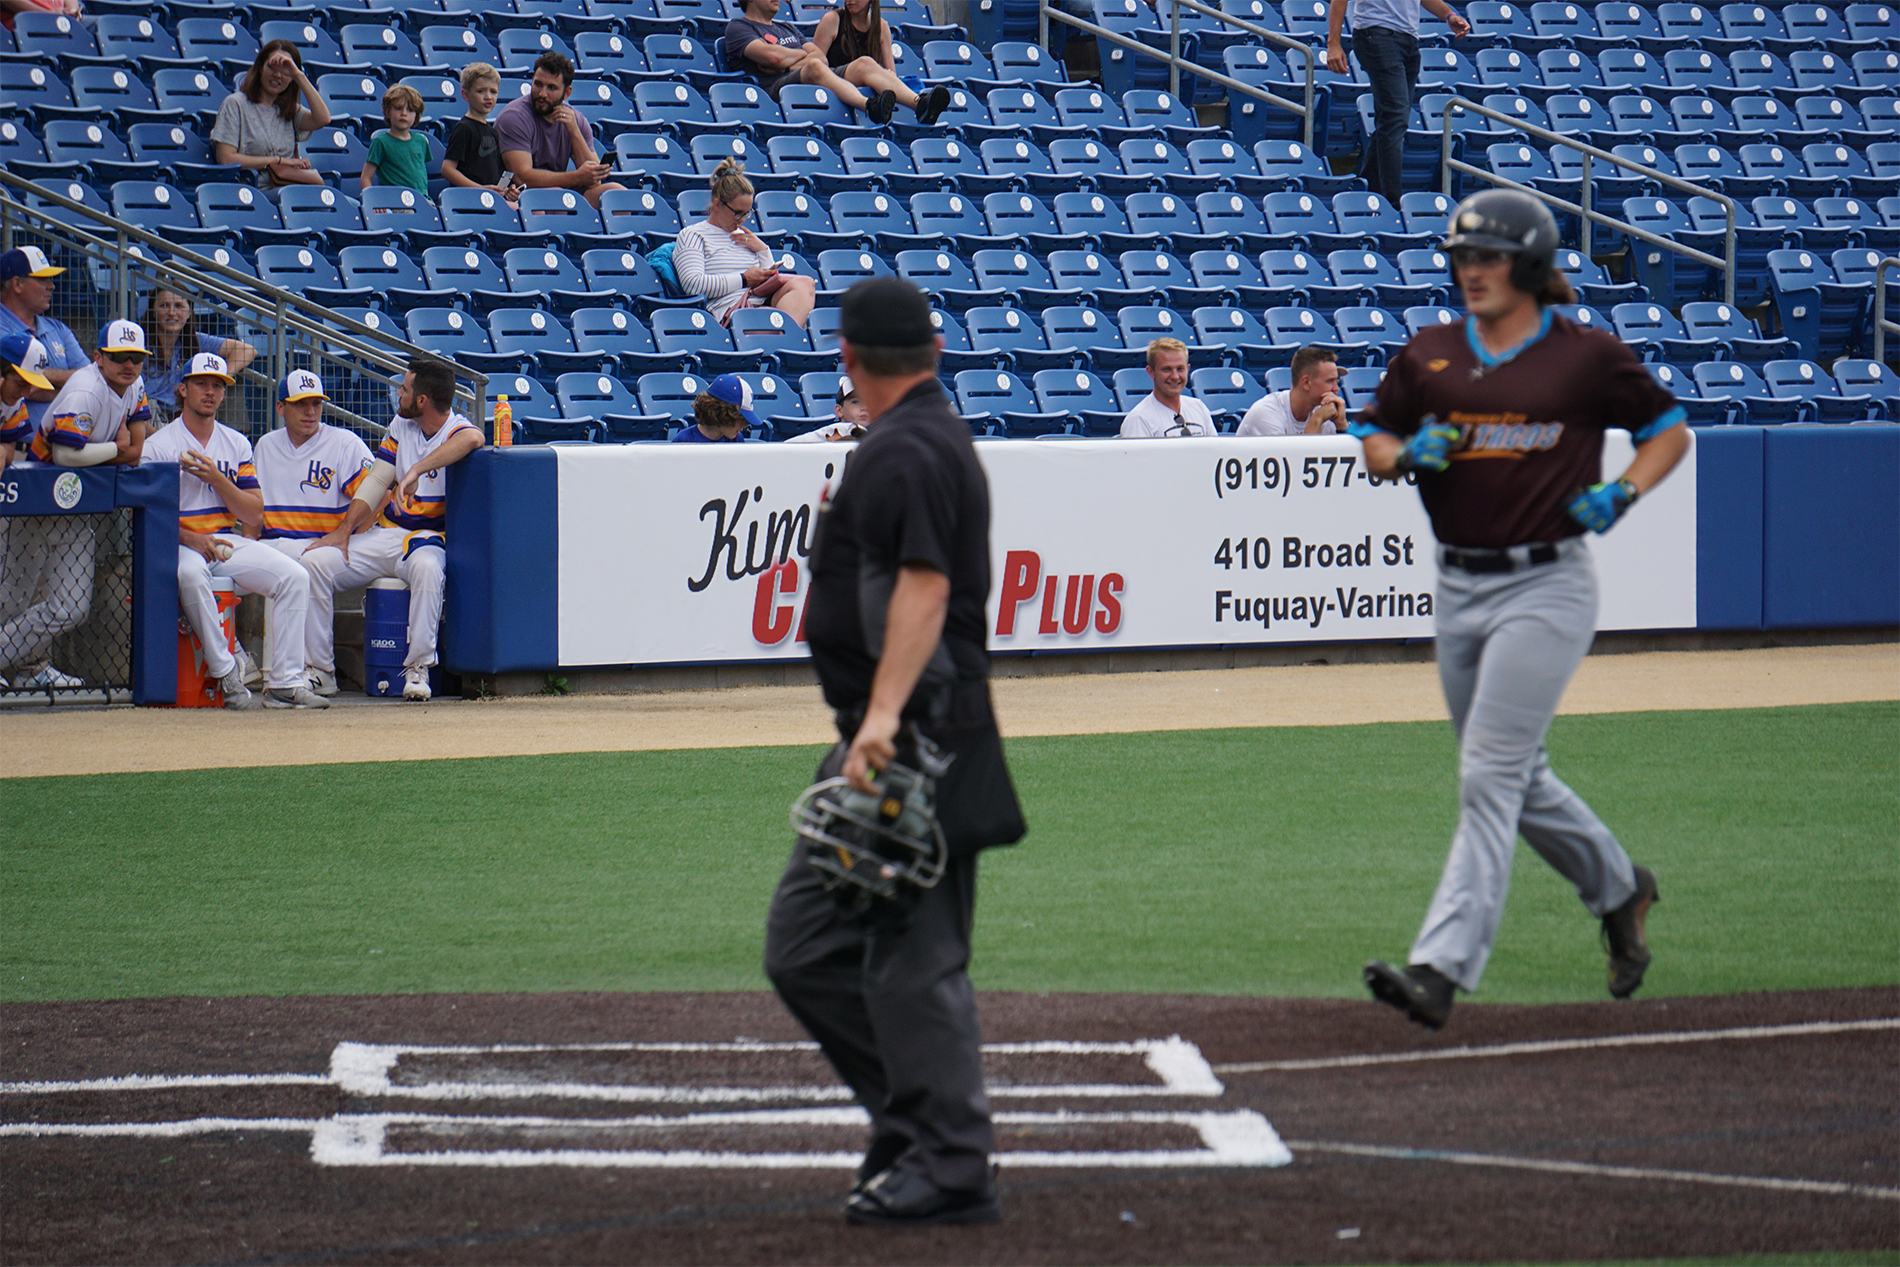 Marlins score team-record 11 runs in 5th inning en route to 15-1 mercy win over Salamanders